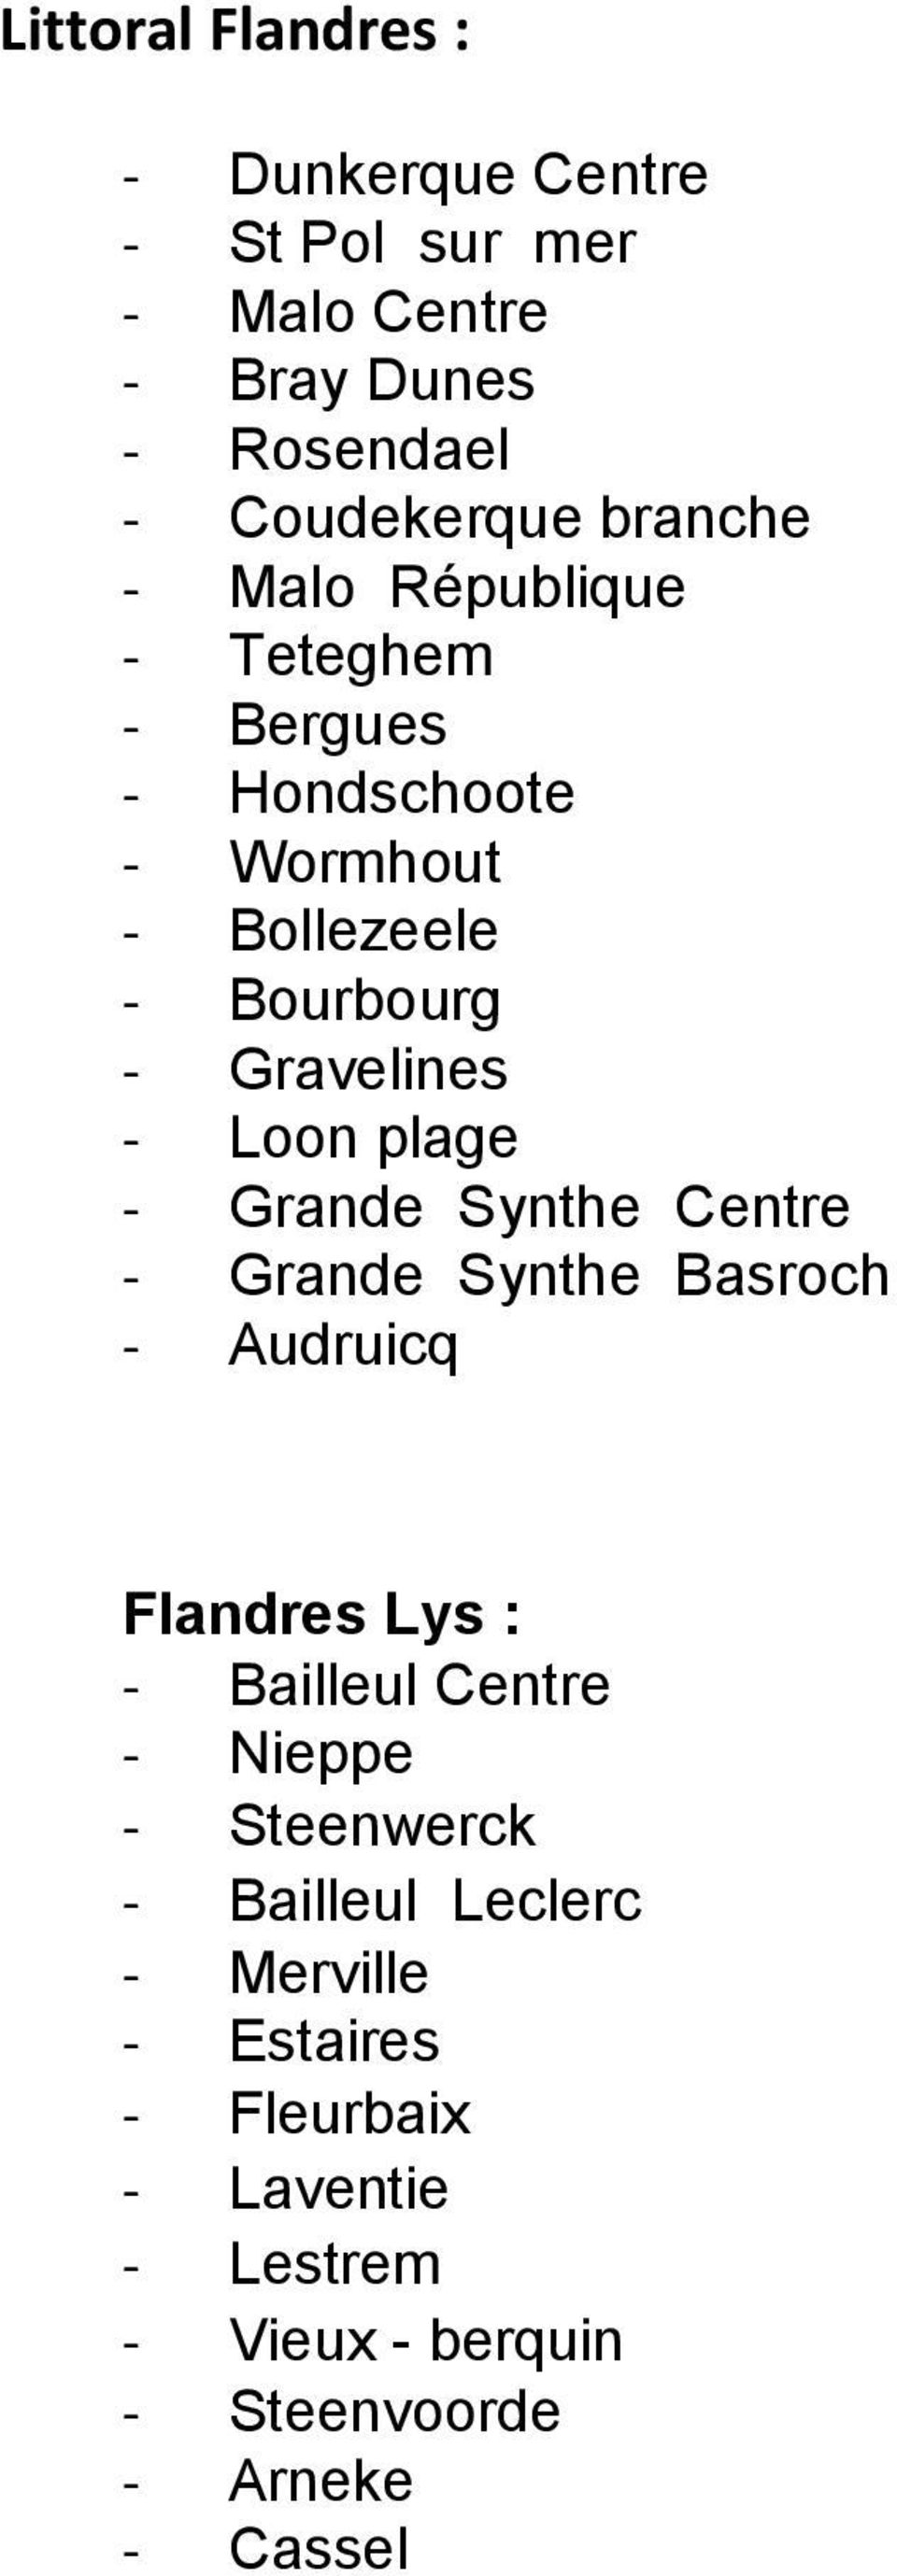 Grande Synthe Centre - Grande Synthe Basroch - Audruicq Flandres Lys : - Bailleul Centre - Nieppe - Steenwerck -